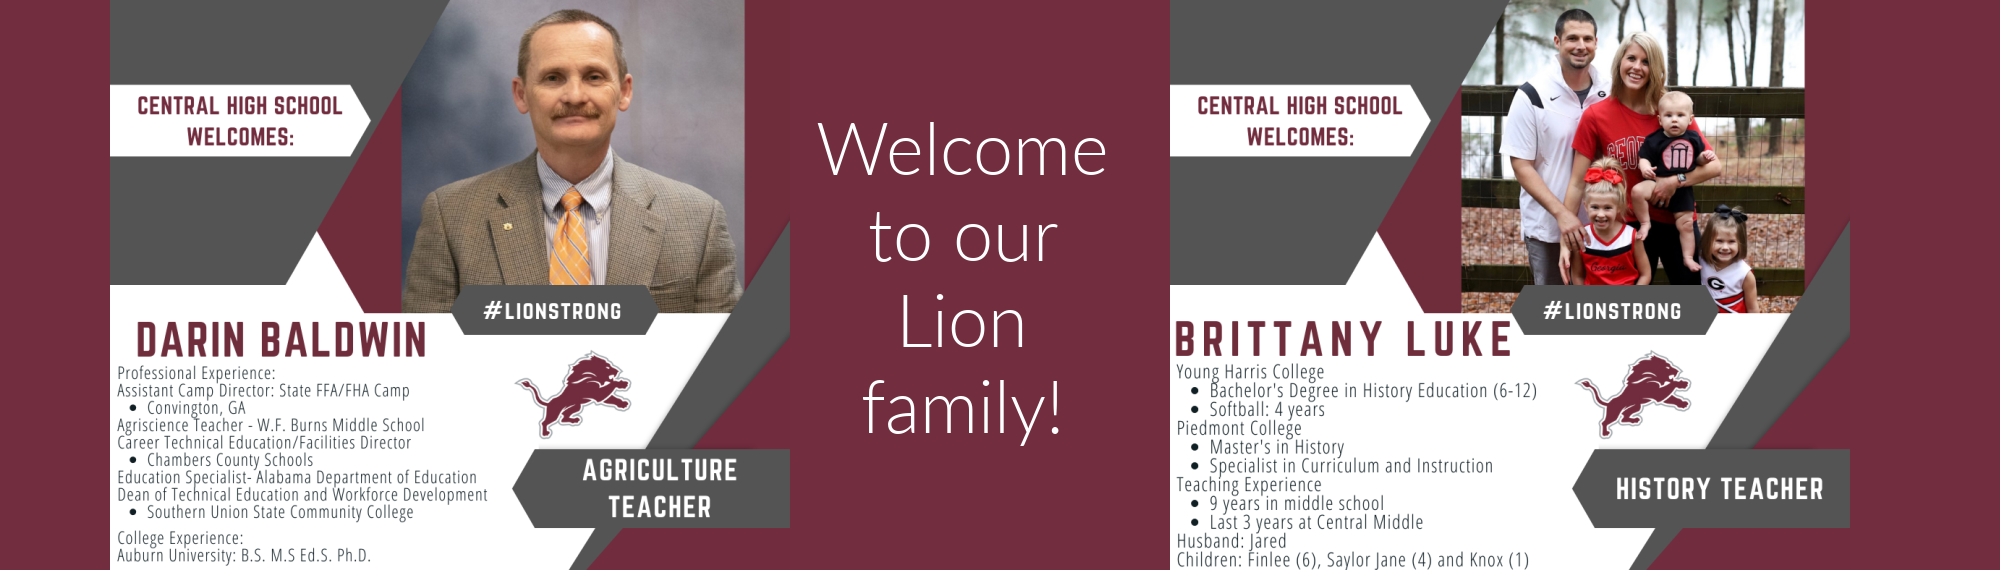 Welcome to our Lion family.